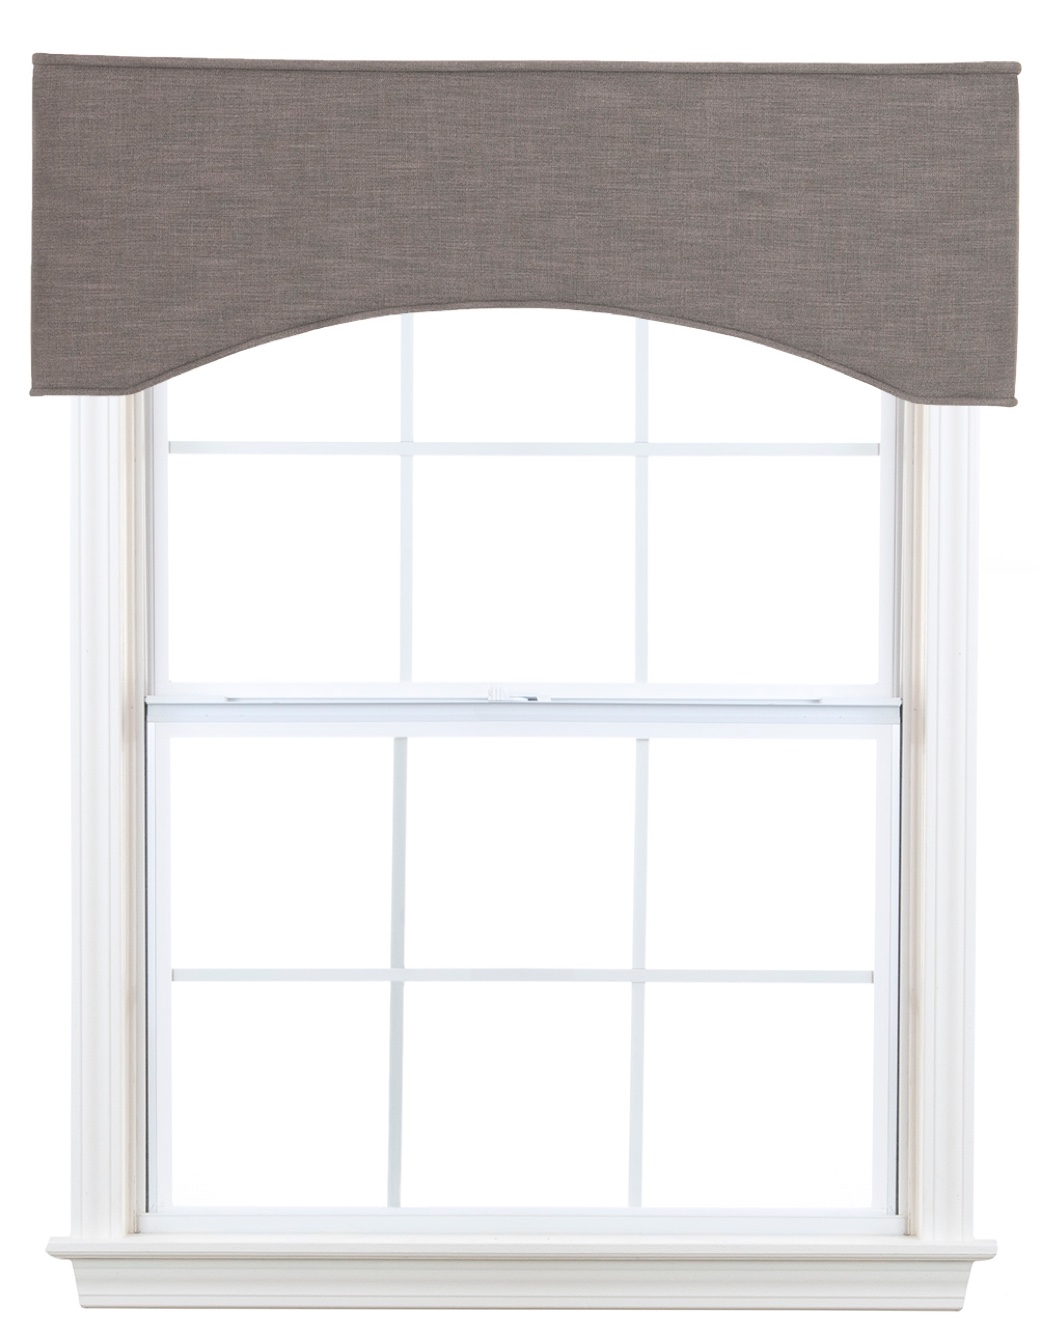 Simple Arched Cornice